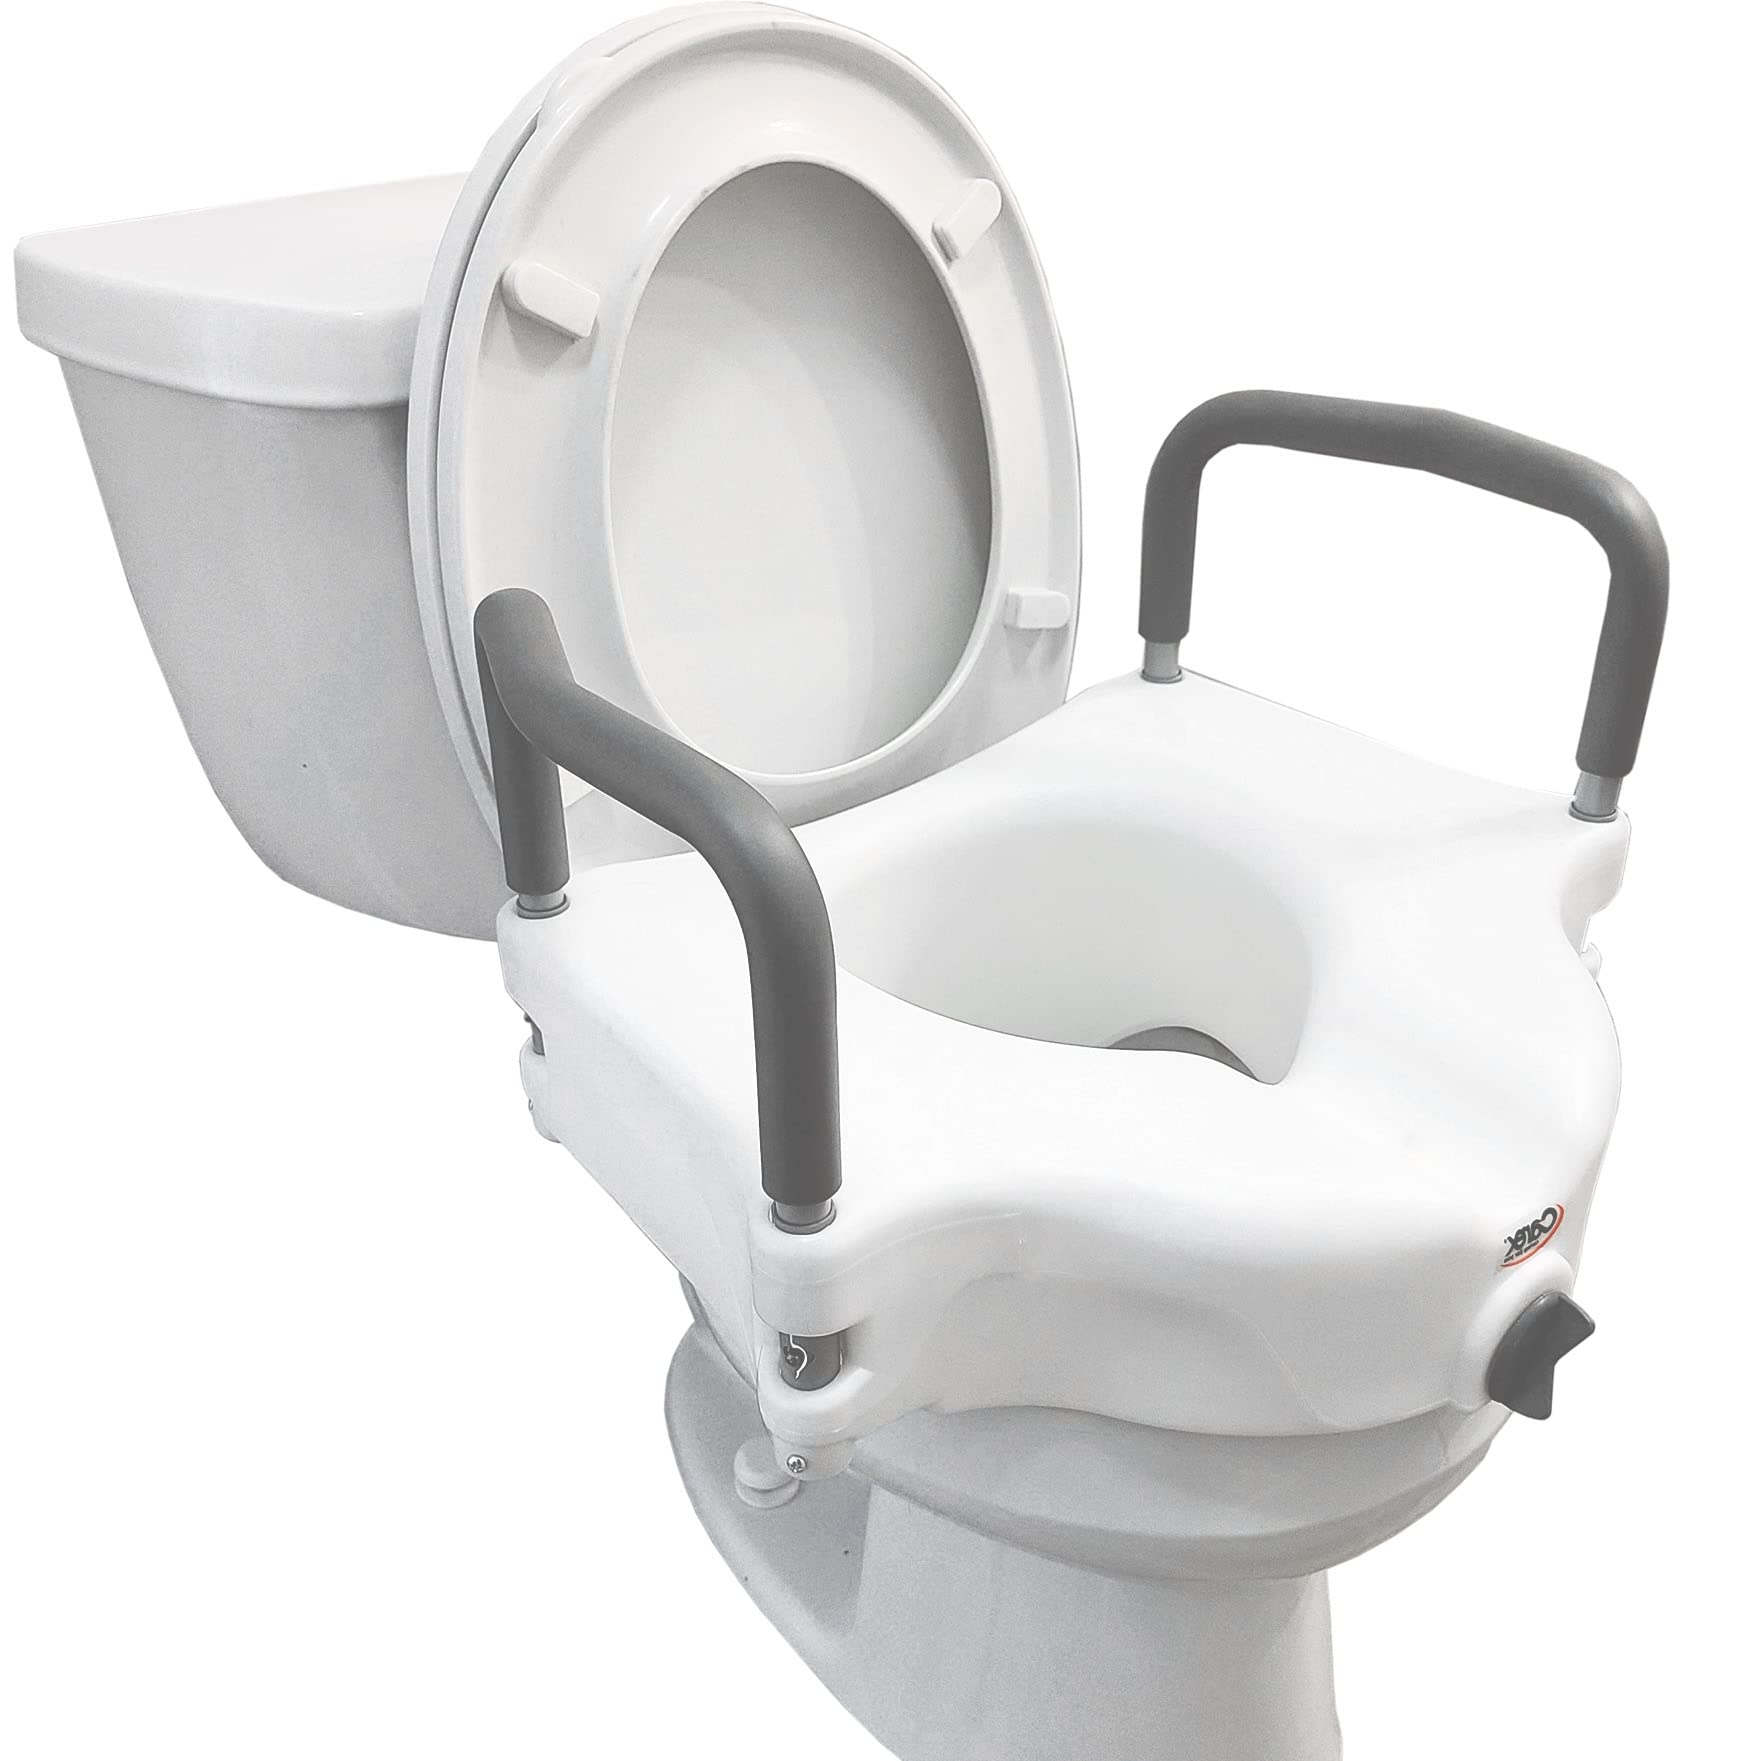 Carex 4.5 Inch Raised Toilet Seat with Arms - For Elongated Toilets, Elevated Toilet Riser with Removable Padded Handles, Easy On and Off, 300lb Weight Capacity, White